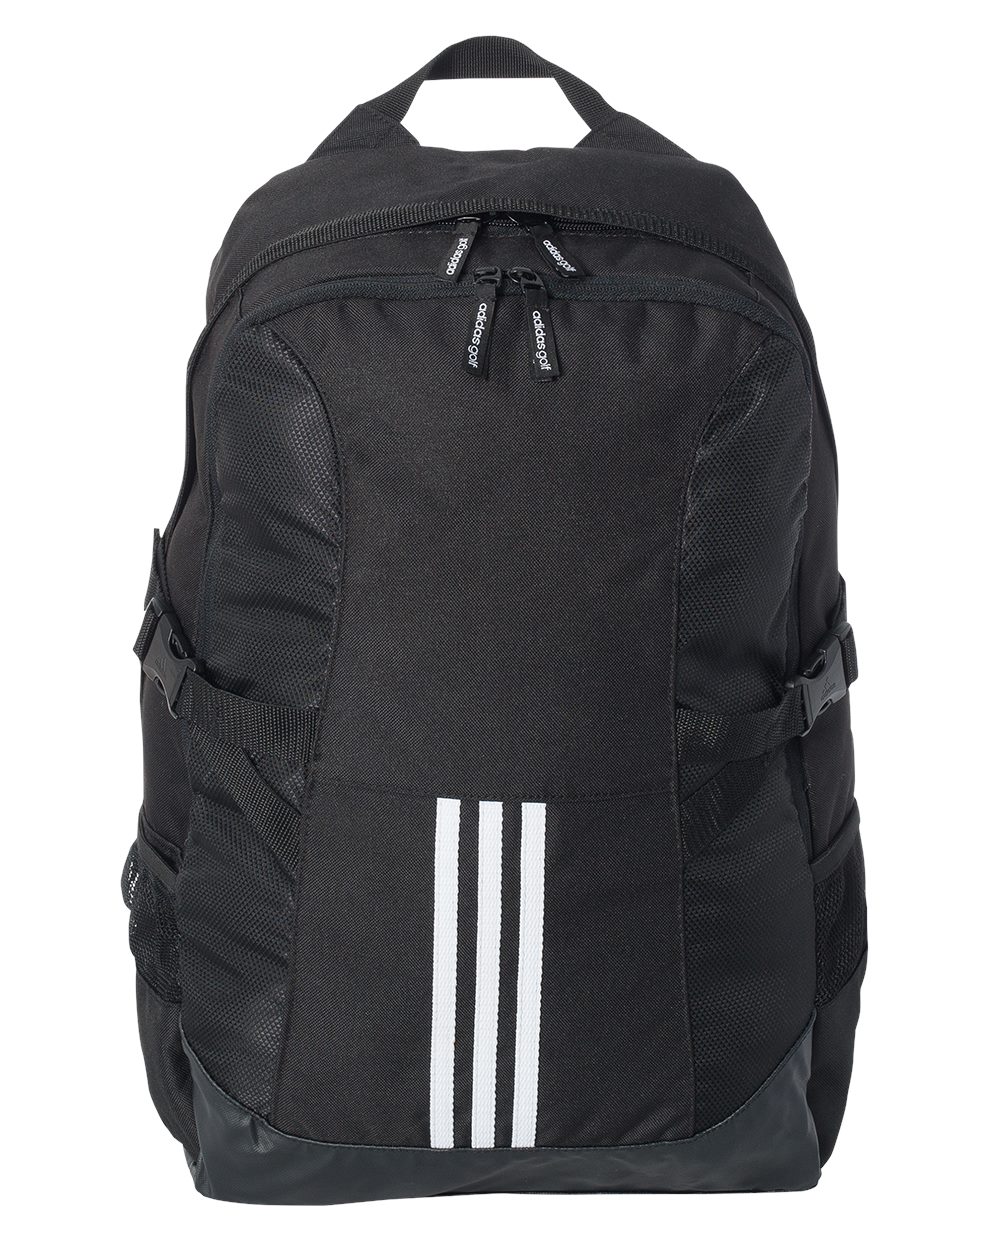 Adidas A300 - 26L Backpack